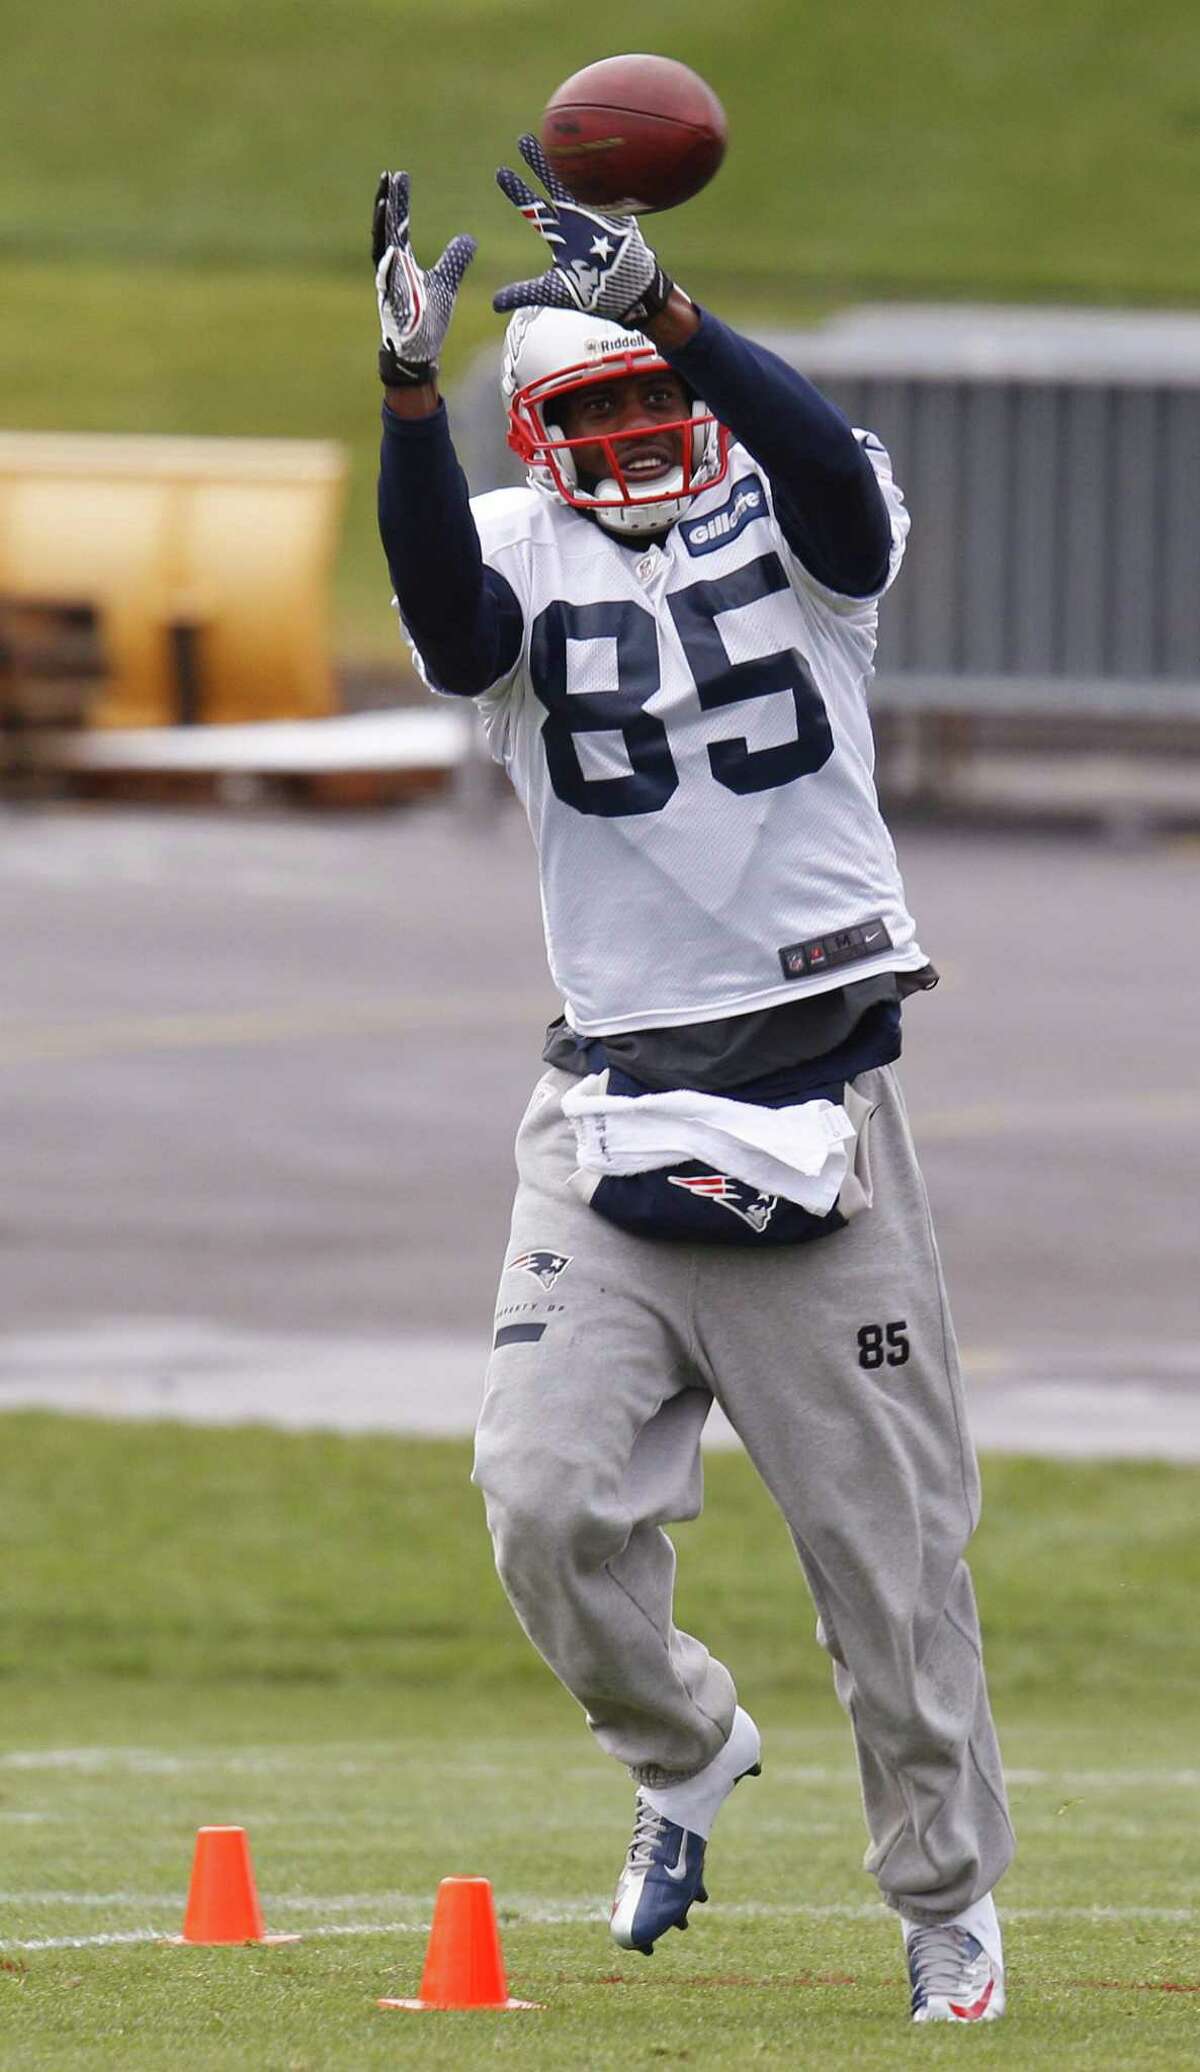 New England Patriots wide receiver Brandon Lloyd (85) catches a pass during practice at the NFL football team's facility in Foxborough, Mass., Wednesday, Nov. 28, 2012. (AP Photo/Stephan Savoia)